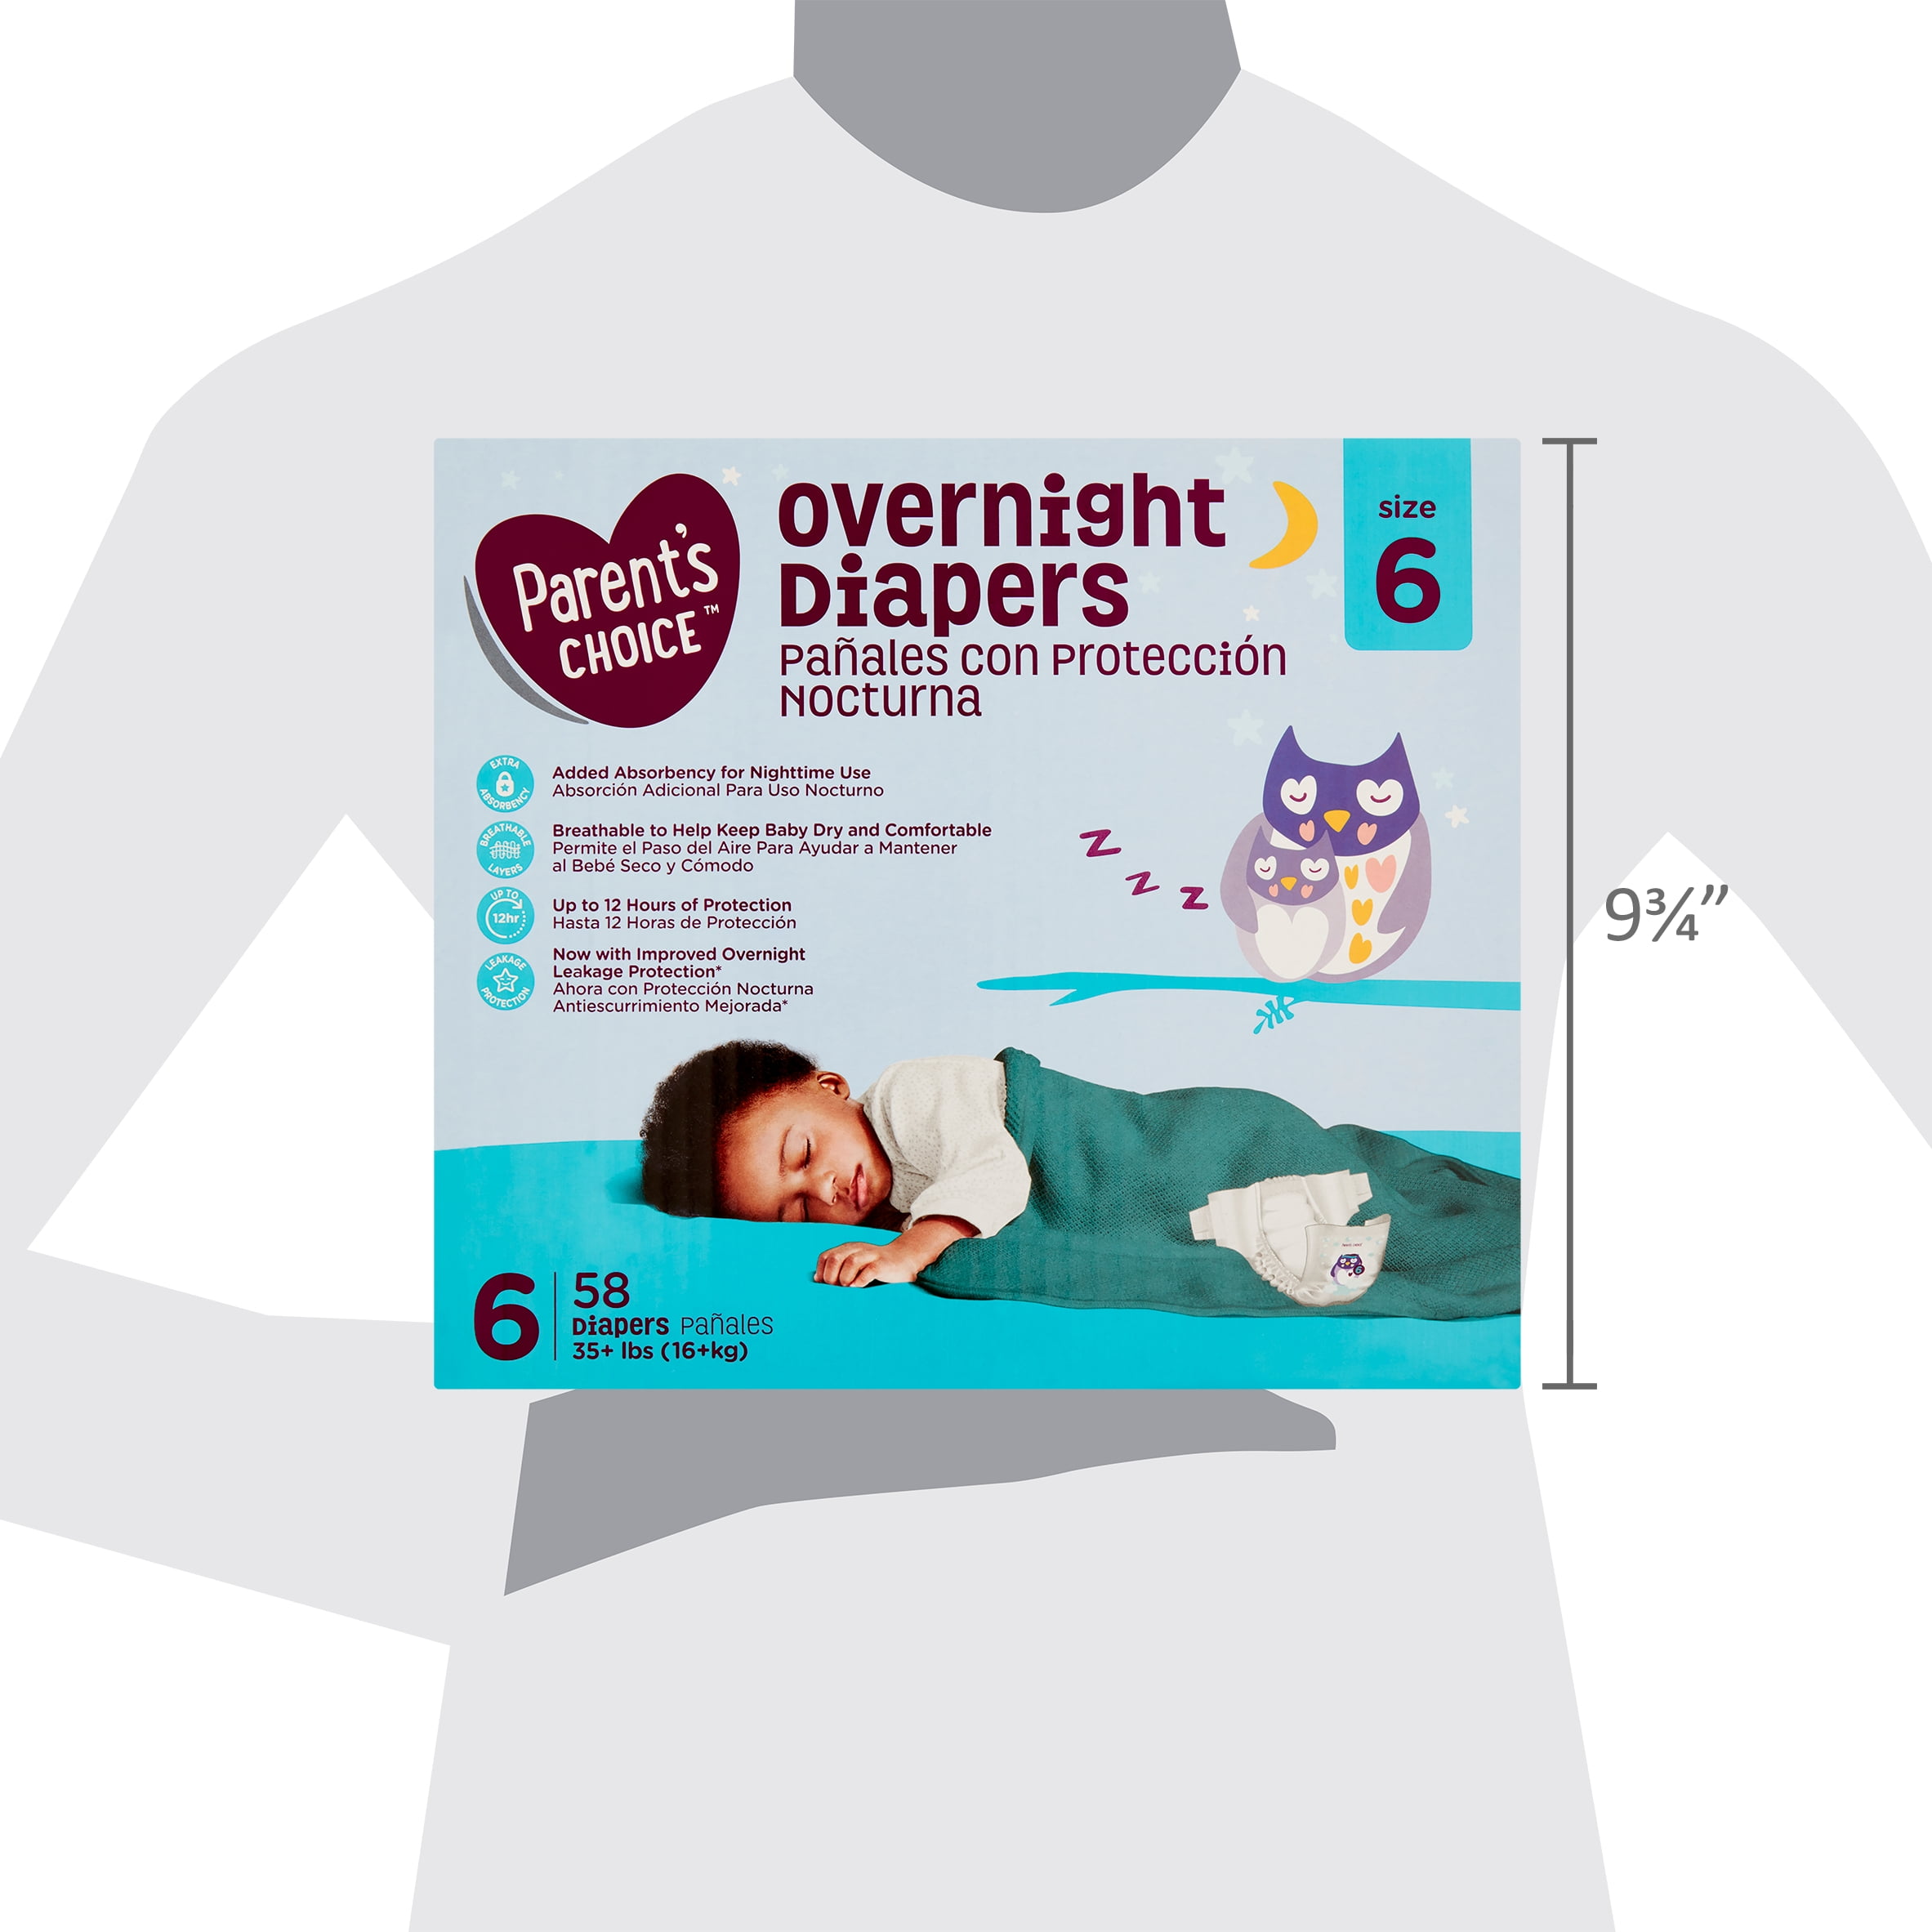 Parent's Choice Gentle Dreams Overnight Diapers, Size 5